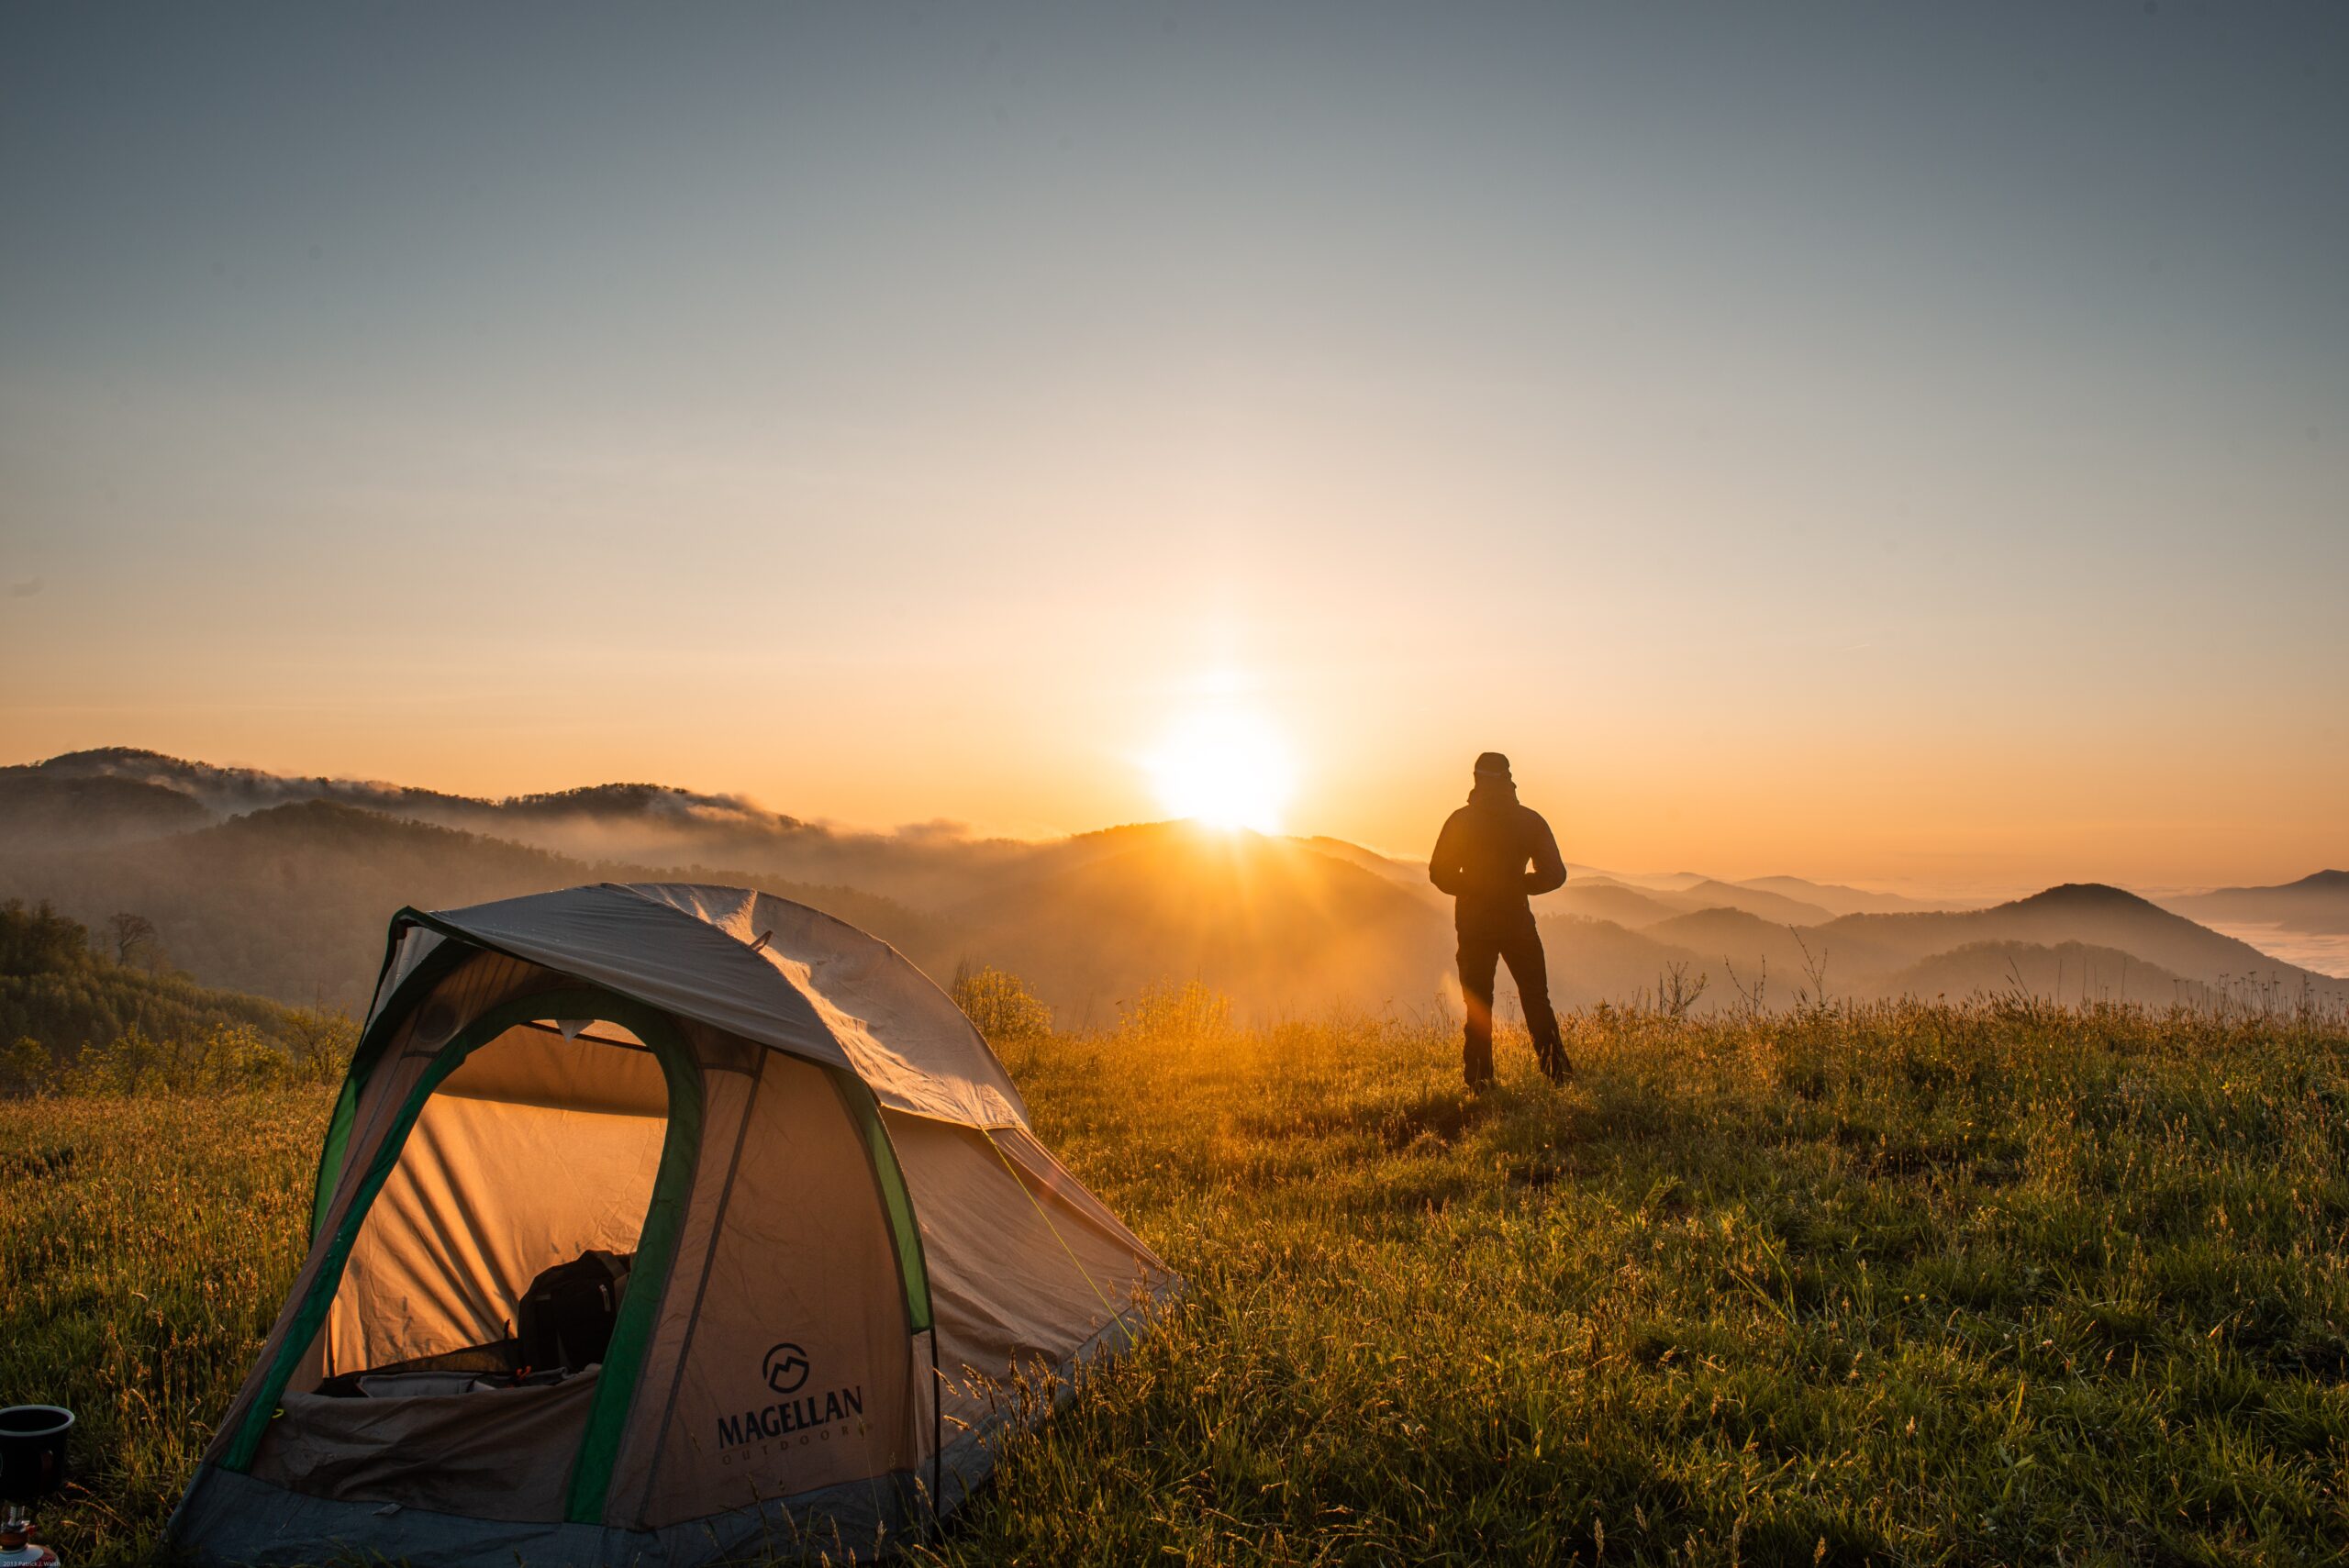 How To Make Your Camping Trip Amazing